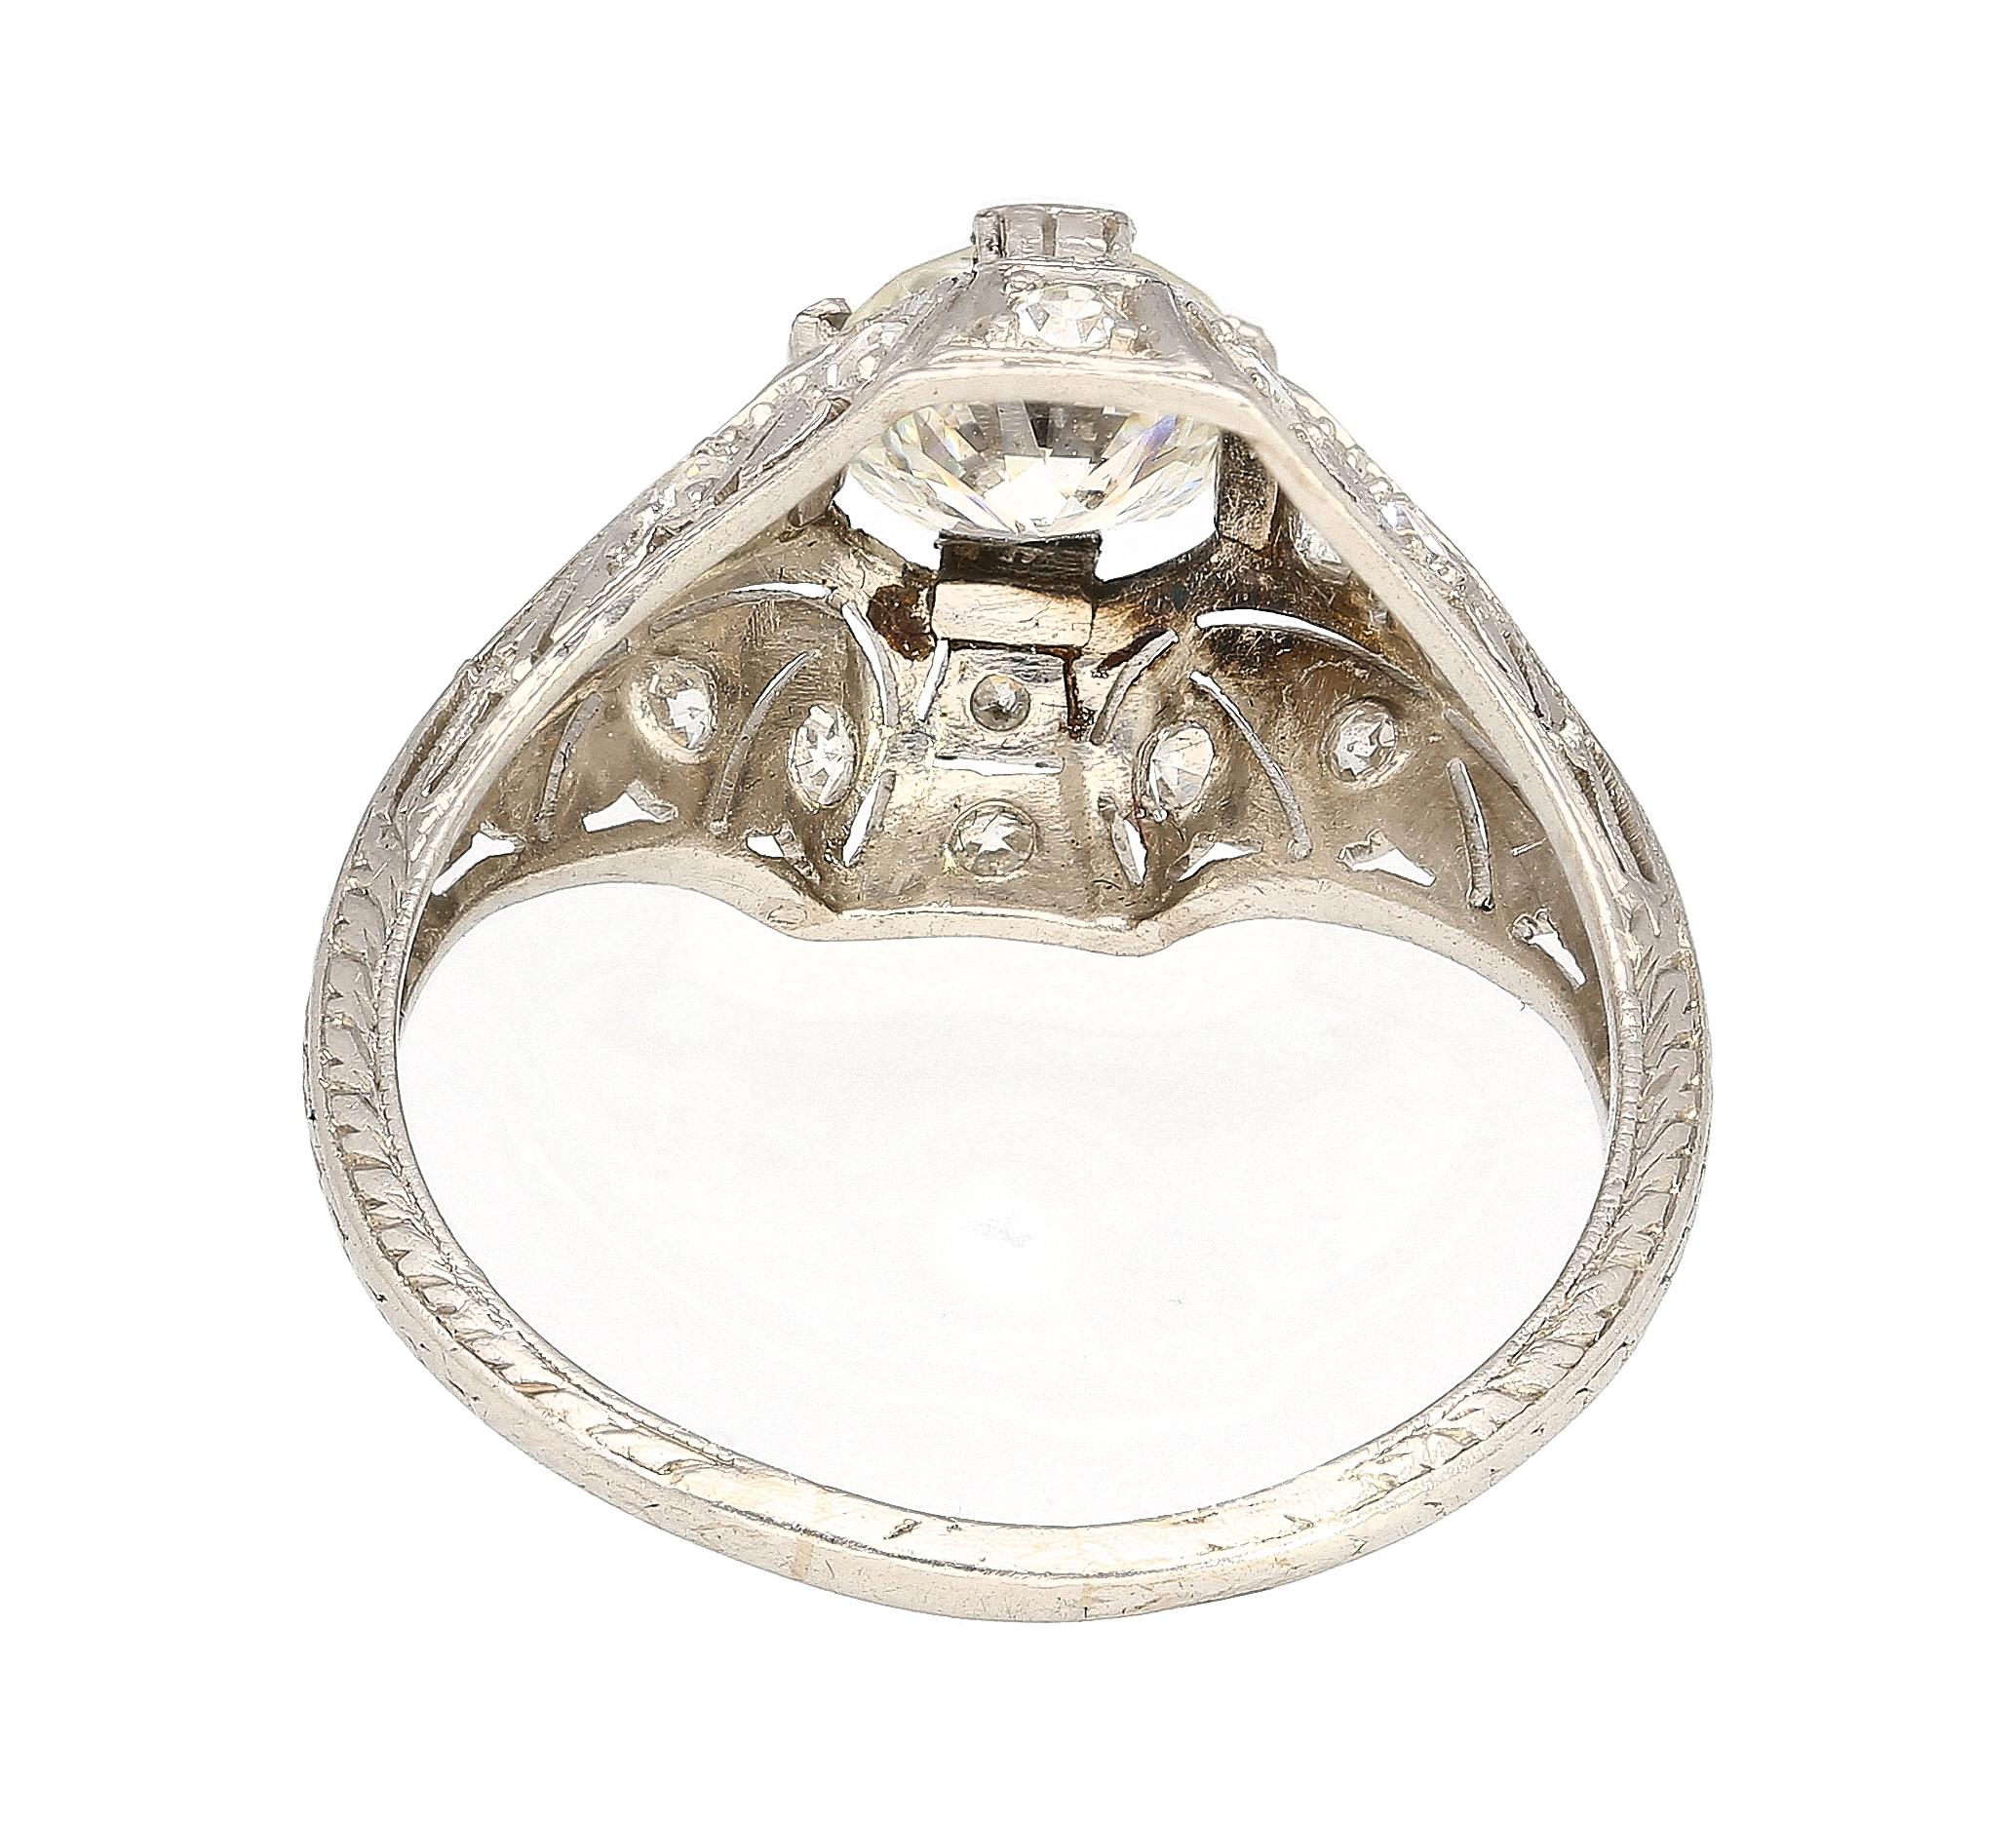 Immerse yourself in history with this antique Art Deco diamond ring. Set in platinum 900 with a curved filigree shank. Old European cut diamond center stone with superb brilliance and shine. Paired with 0.30 carats total in round cut diamond side